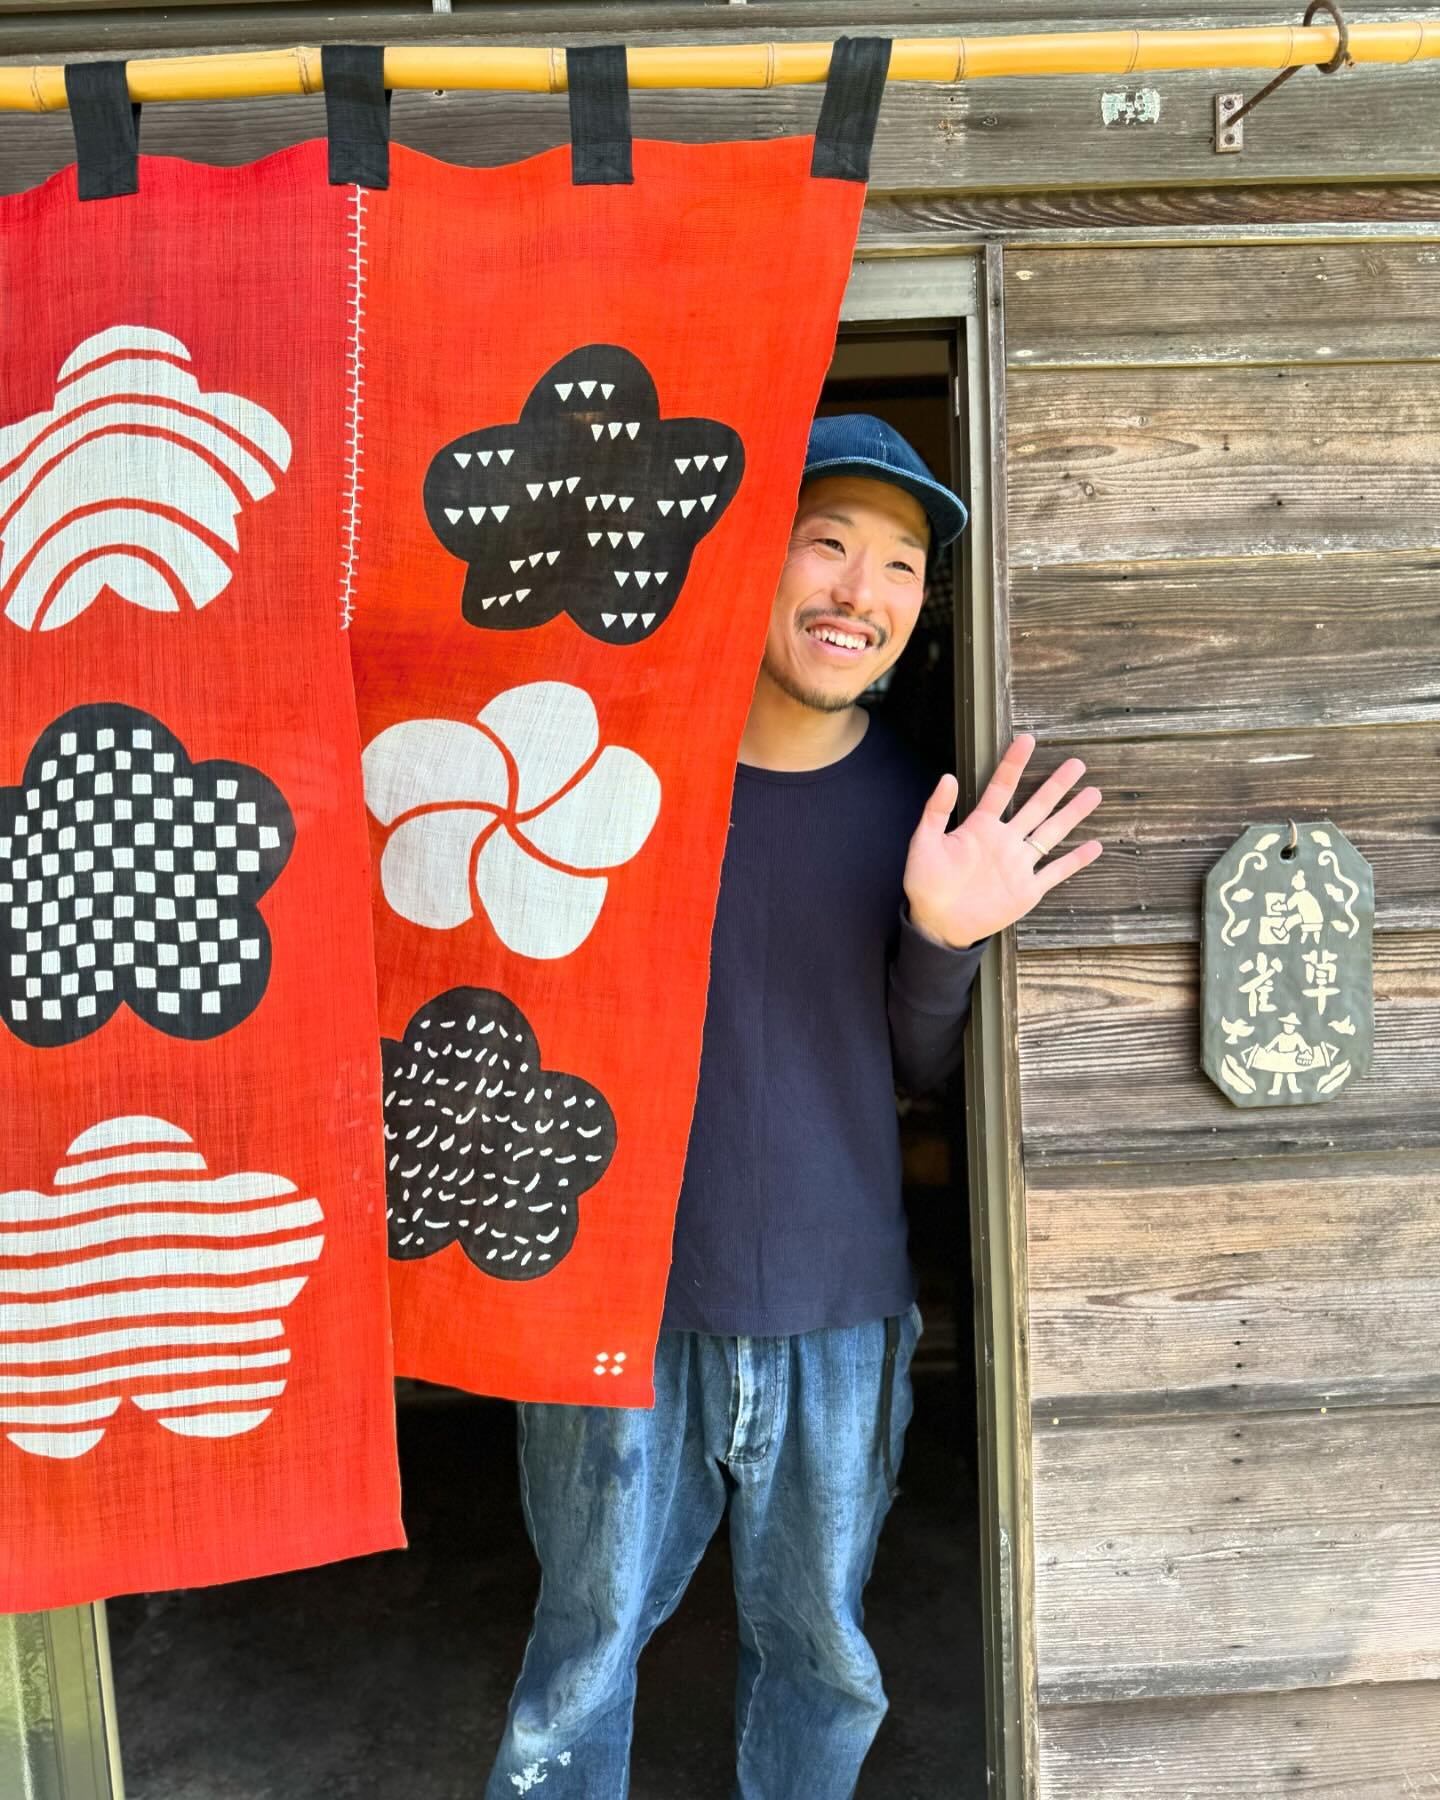 A highlight of our itinerary was a visit to this wonderful katazome workshop 🥰 
.
.
.
#japanesetextiles #japaneseculture #japanesecraft
#traveldeeper #katazome